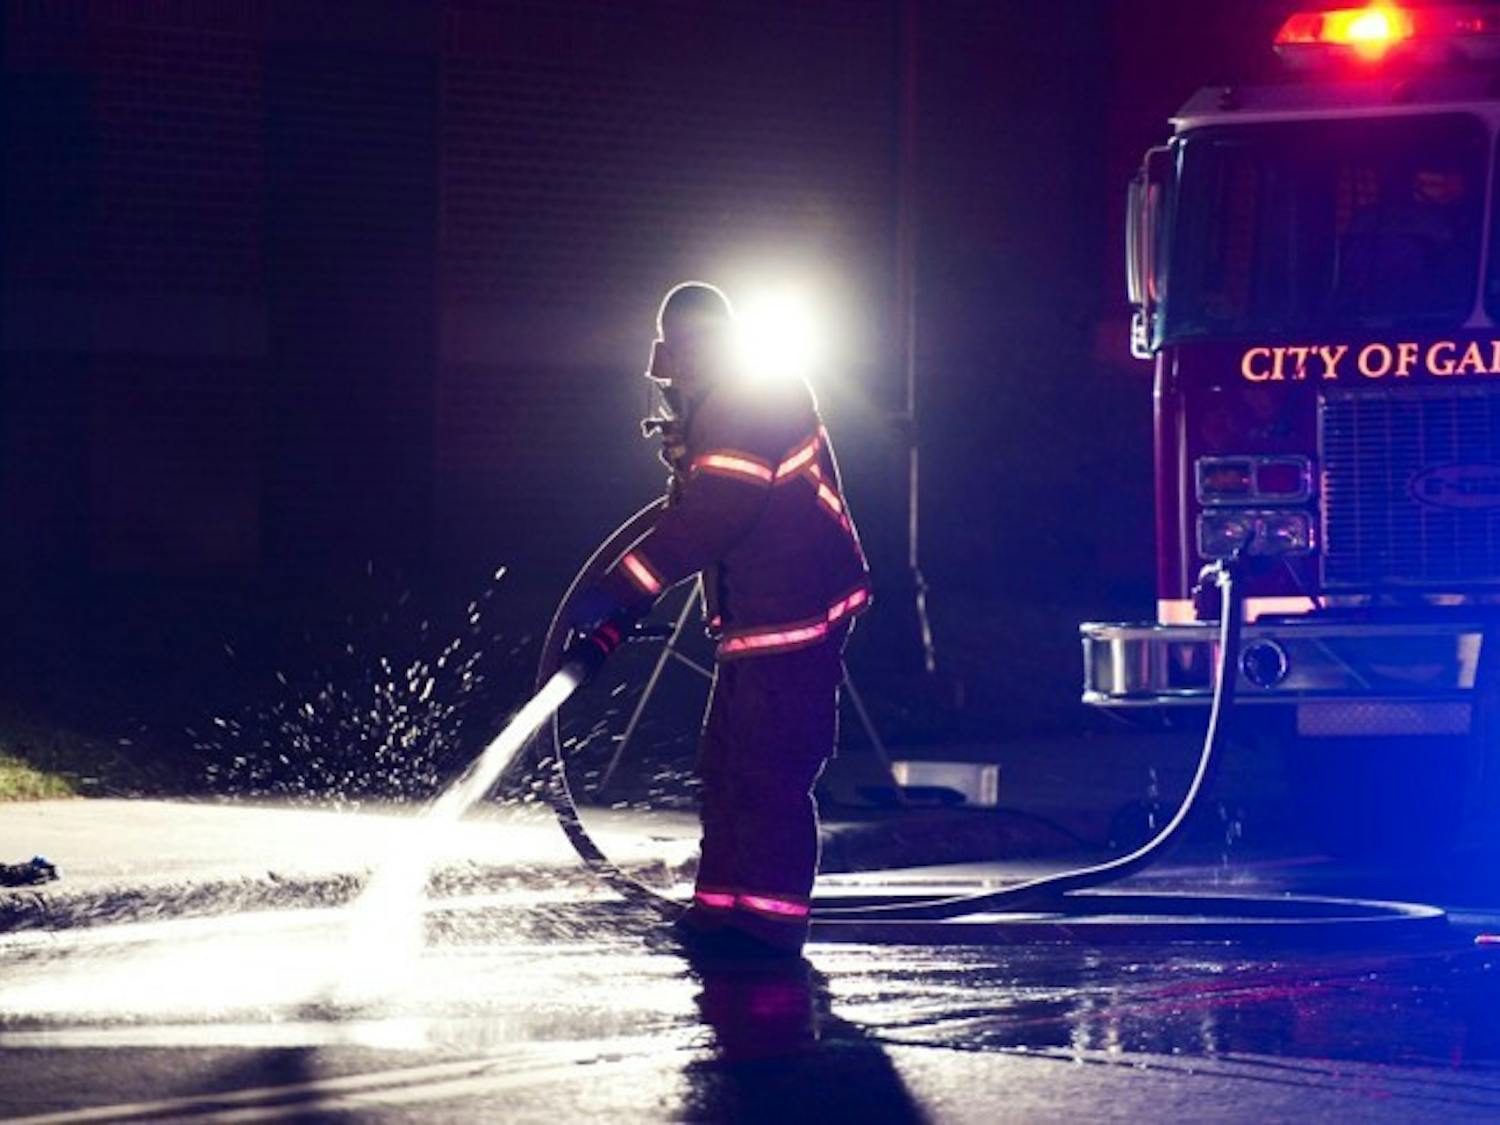 A firefighter hoses down Union Road after a chemical reactant explosion at Sisler Hall on Wednesday evening.